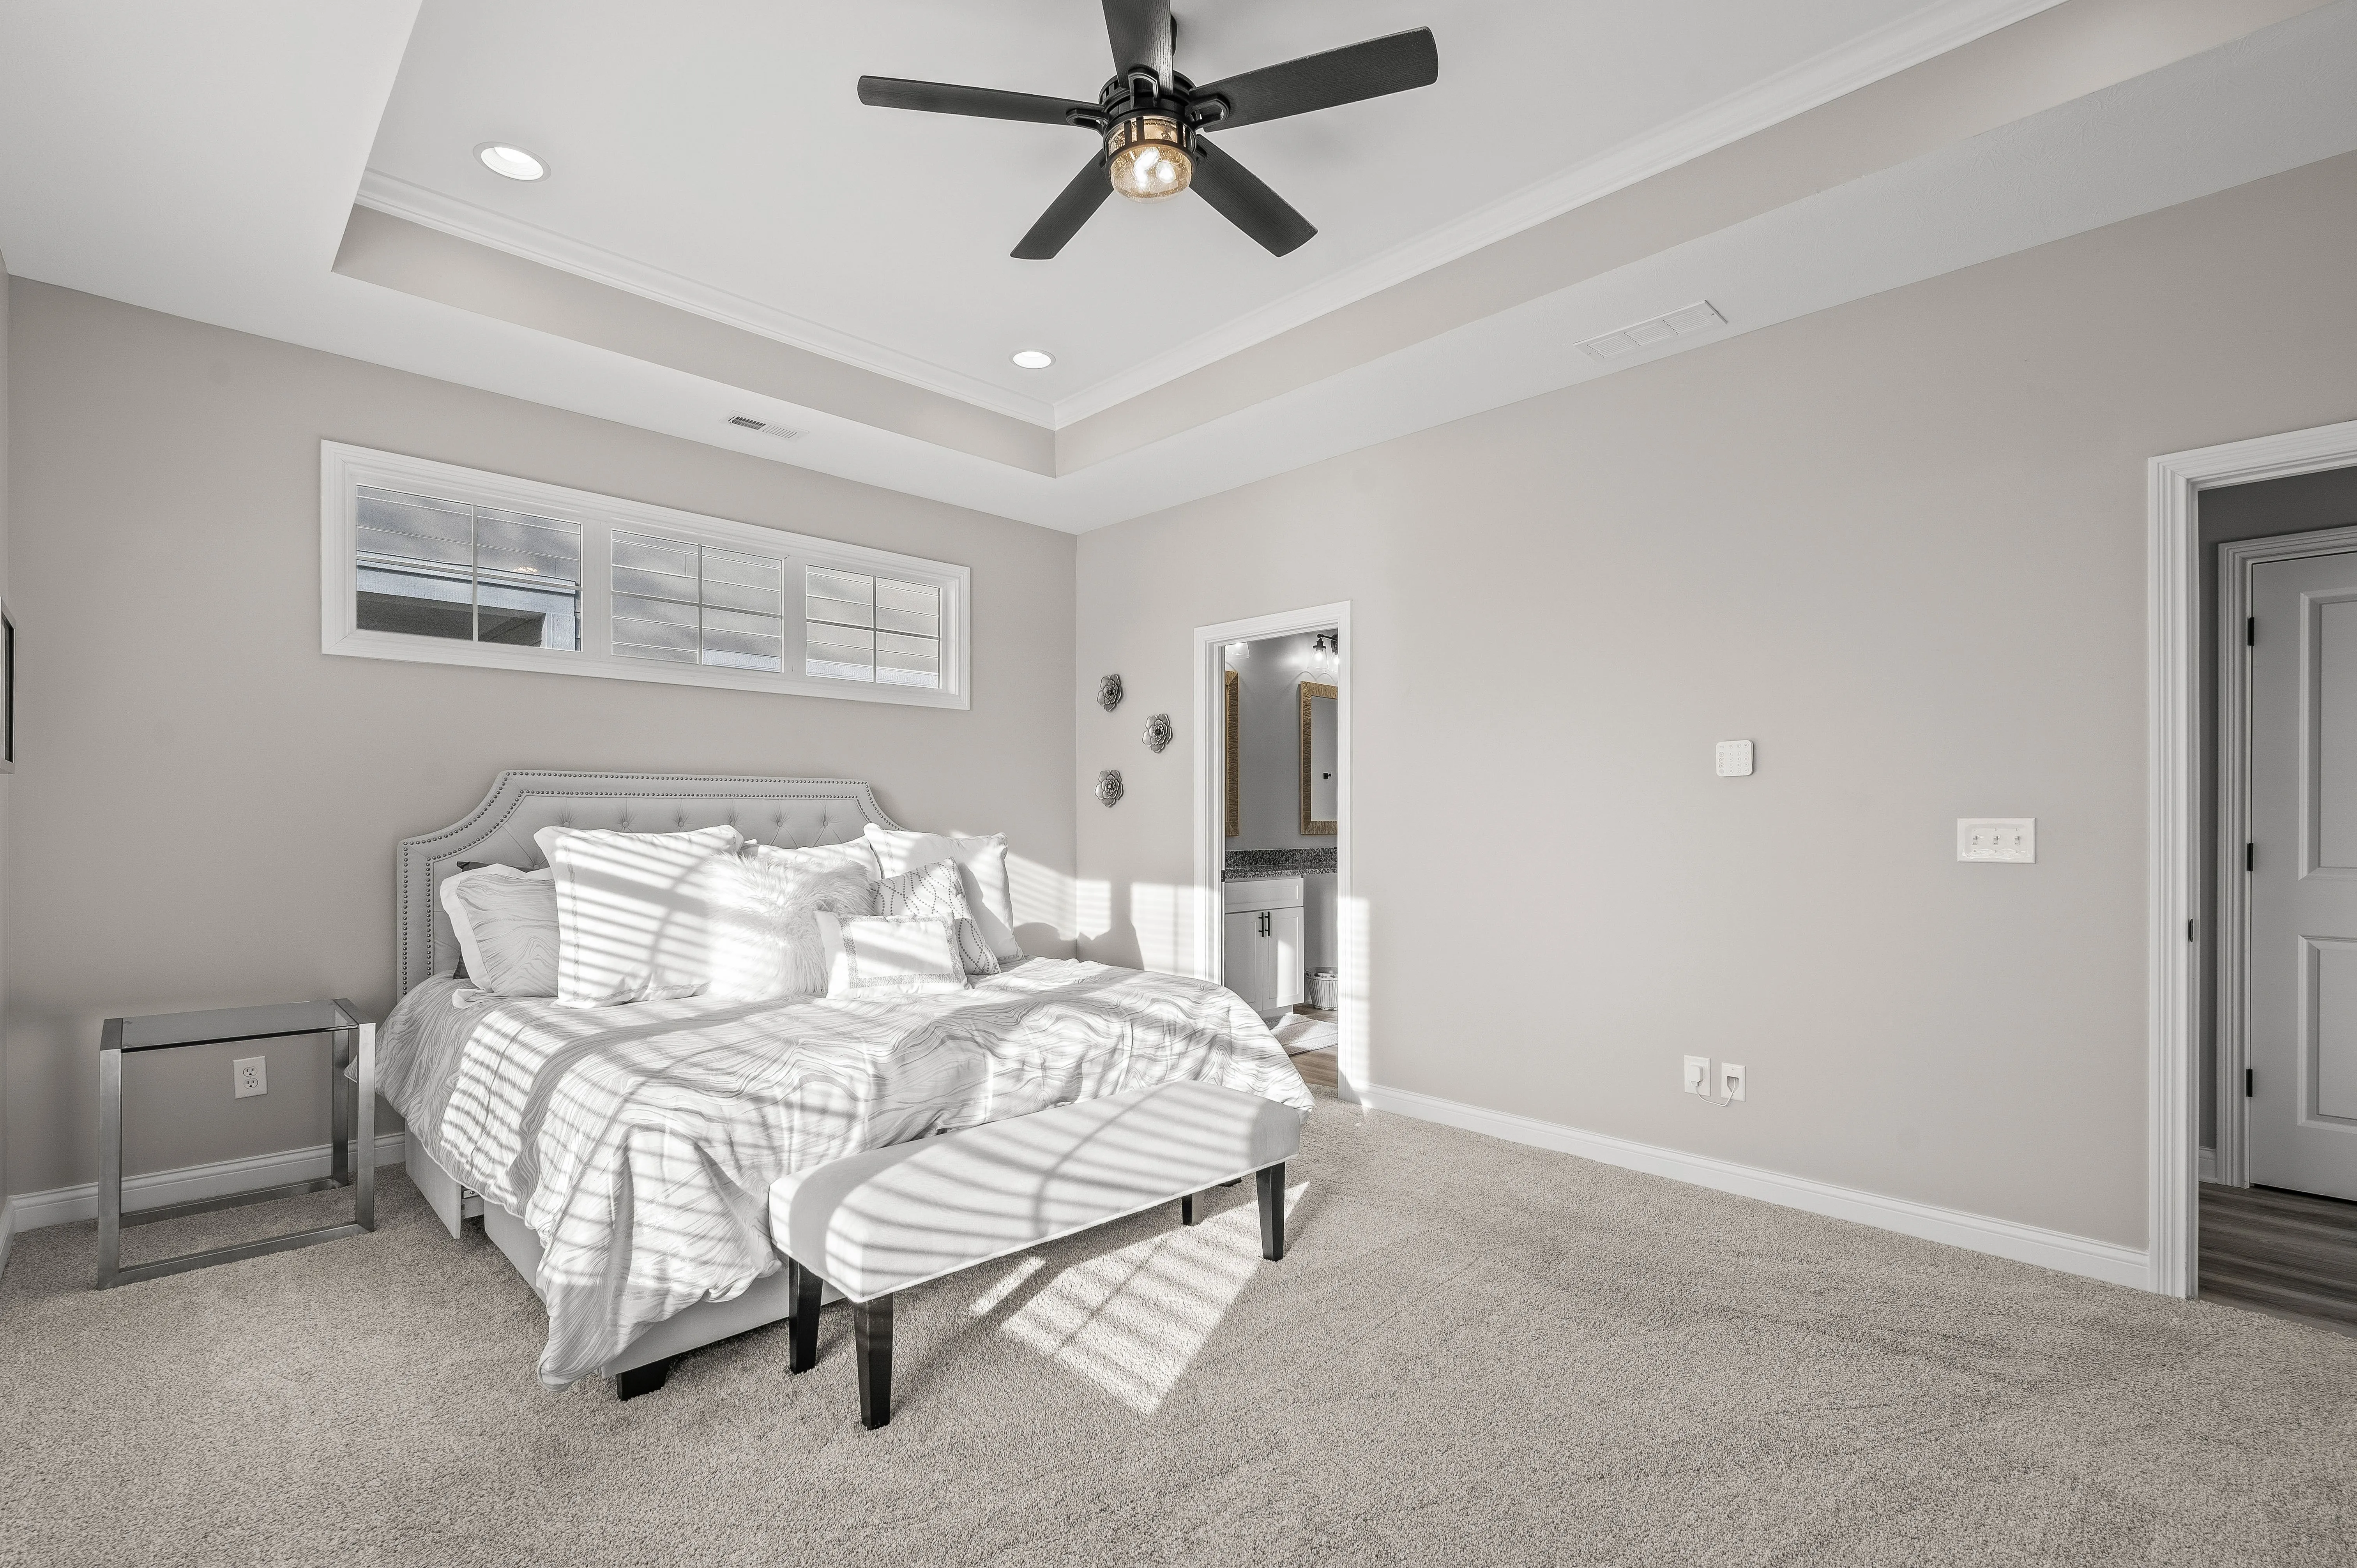 Bright and airy bedroom with a large bed, white and gray bedding, ceiling fan, and a glimpse into the en-suite bathroom.